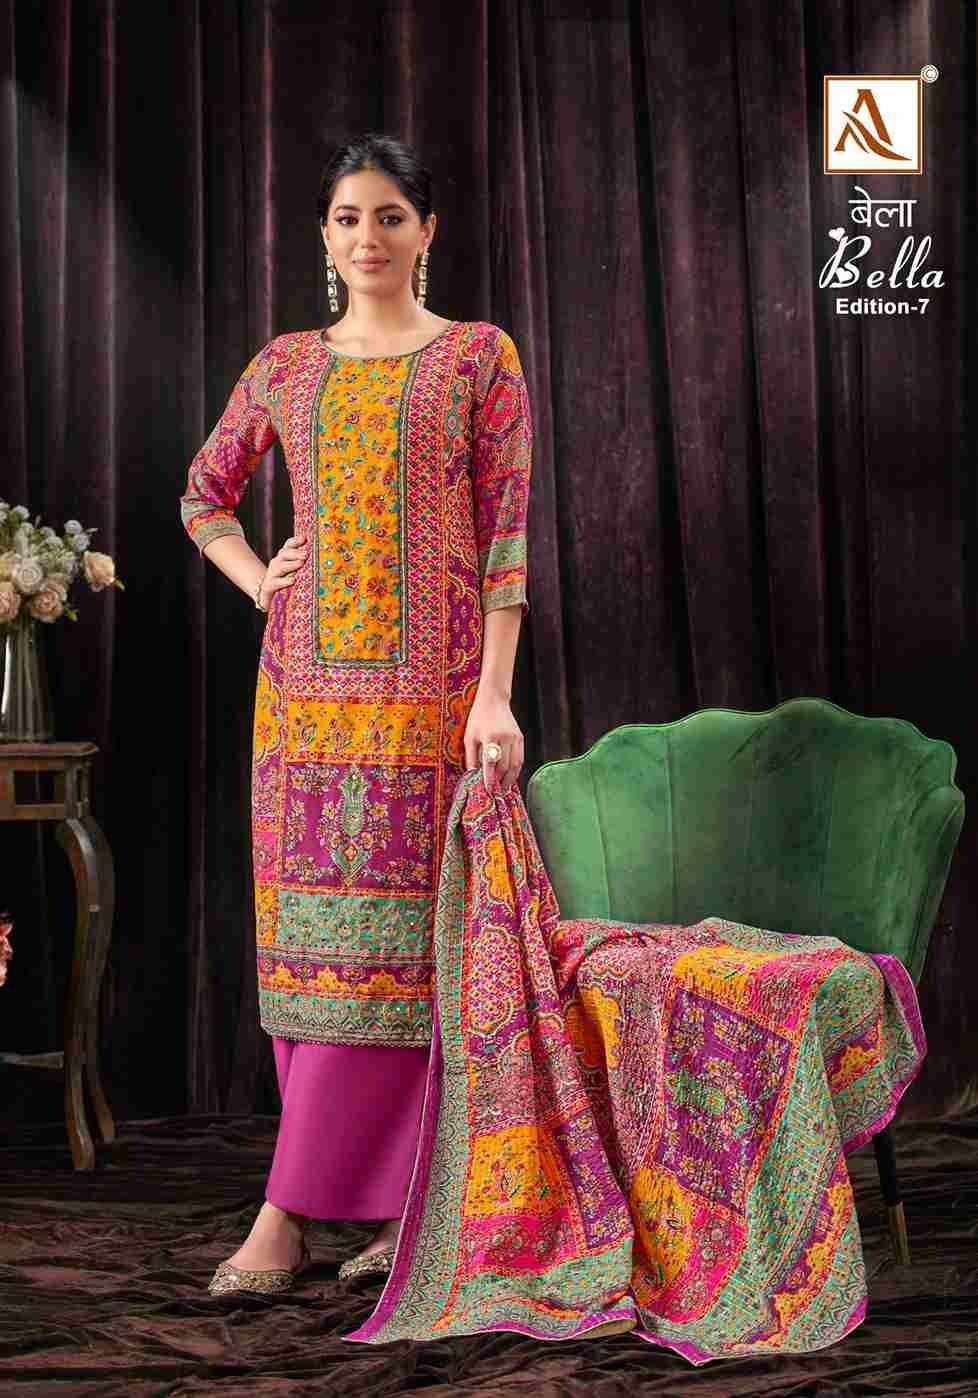 Bella Vol-7 By Alok Suit 1527-001 To 1527-006 Series Beautiful Festive Suits Stylish Fancy Colorful Casual Wear & Ethnic Wear Pure Muslin Print Dresses At Wholesale Price